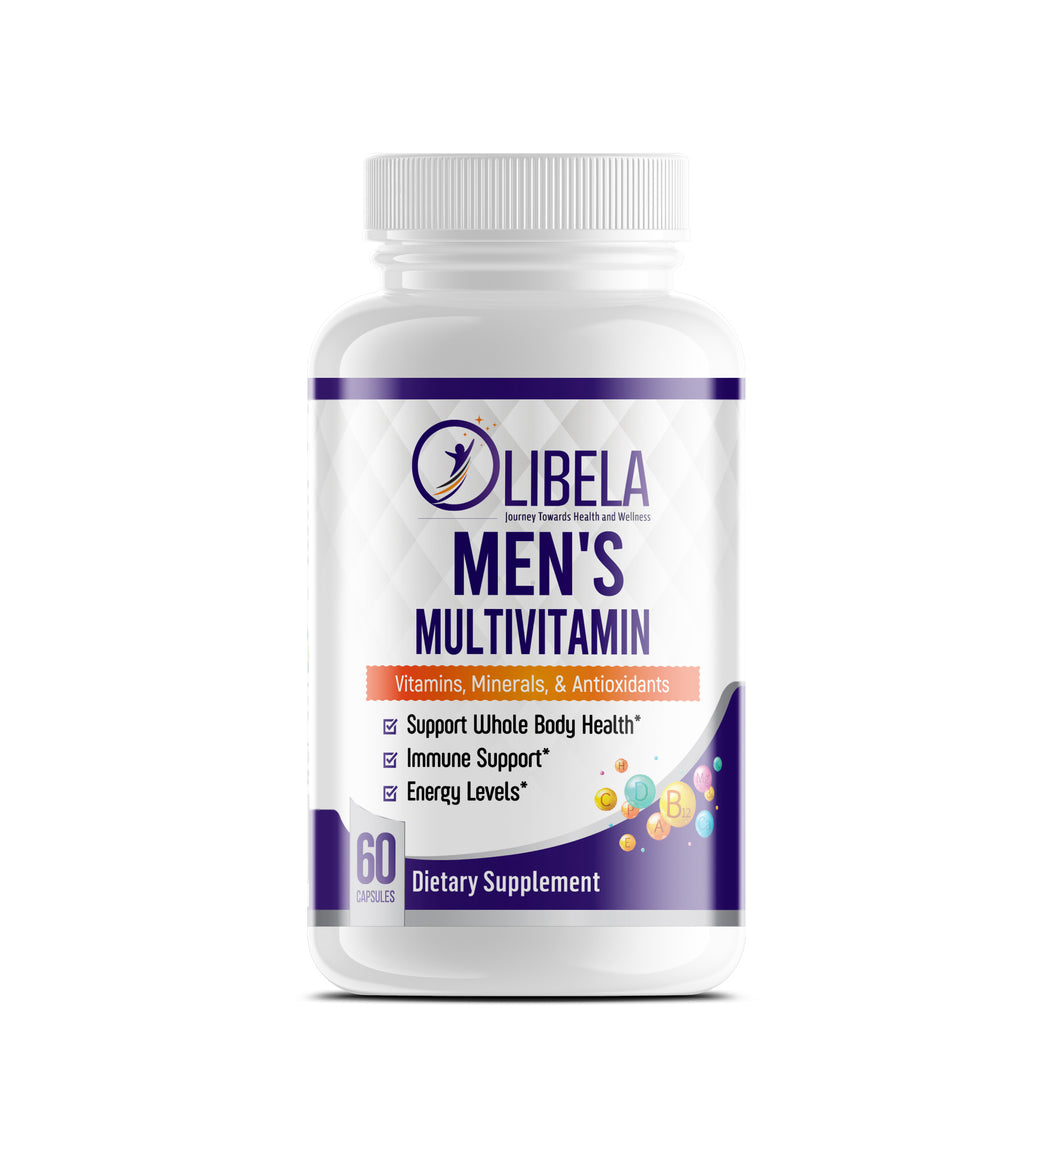 One a Day Men's Multivitamins | Antioxidants & Probiotic - Men’s Daily Multivitamins - With Vitamins, Minerals, Lutein, Antioxidants & Probiotics. Immune Support, Male Support, Prostate Health, and Increase Energy Levels, 60 Caps.